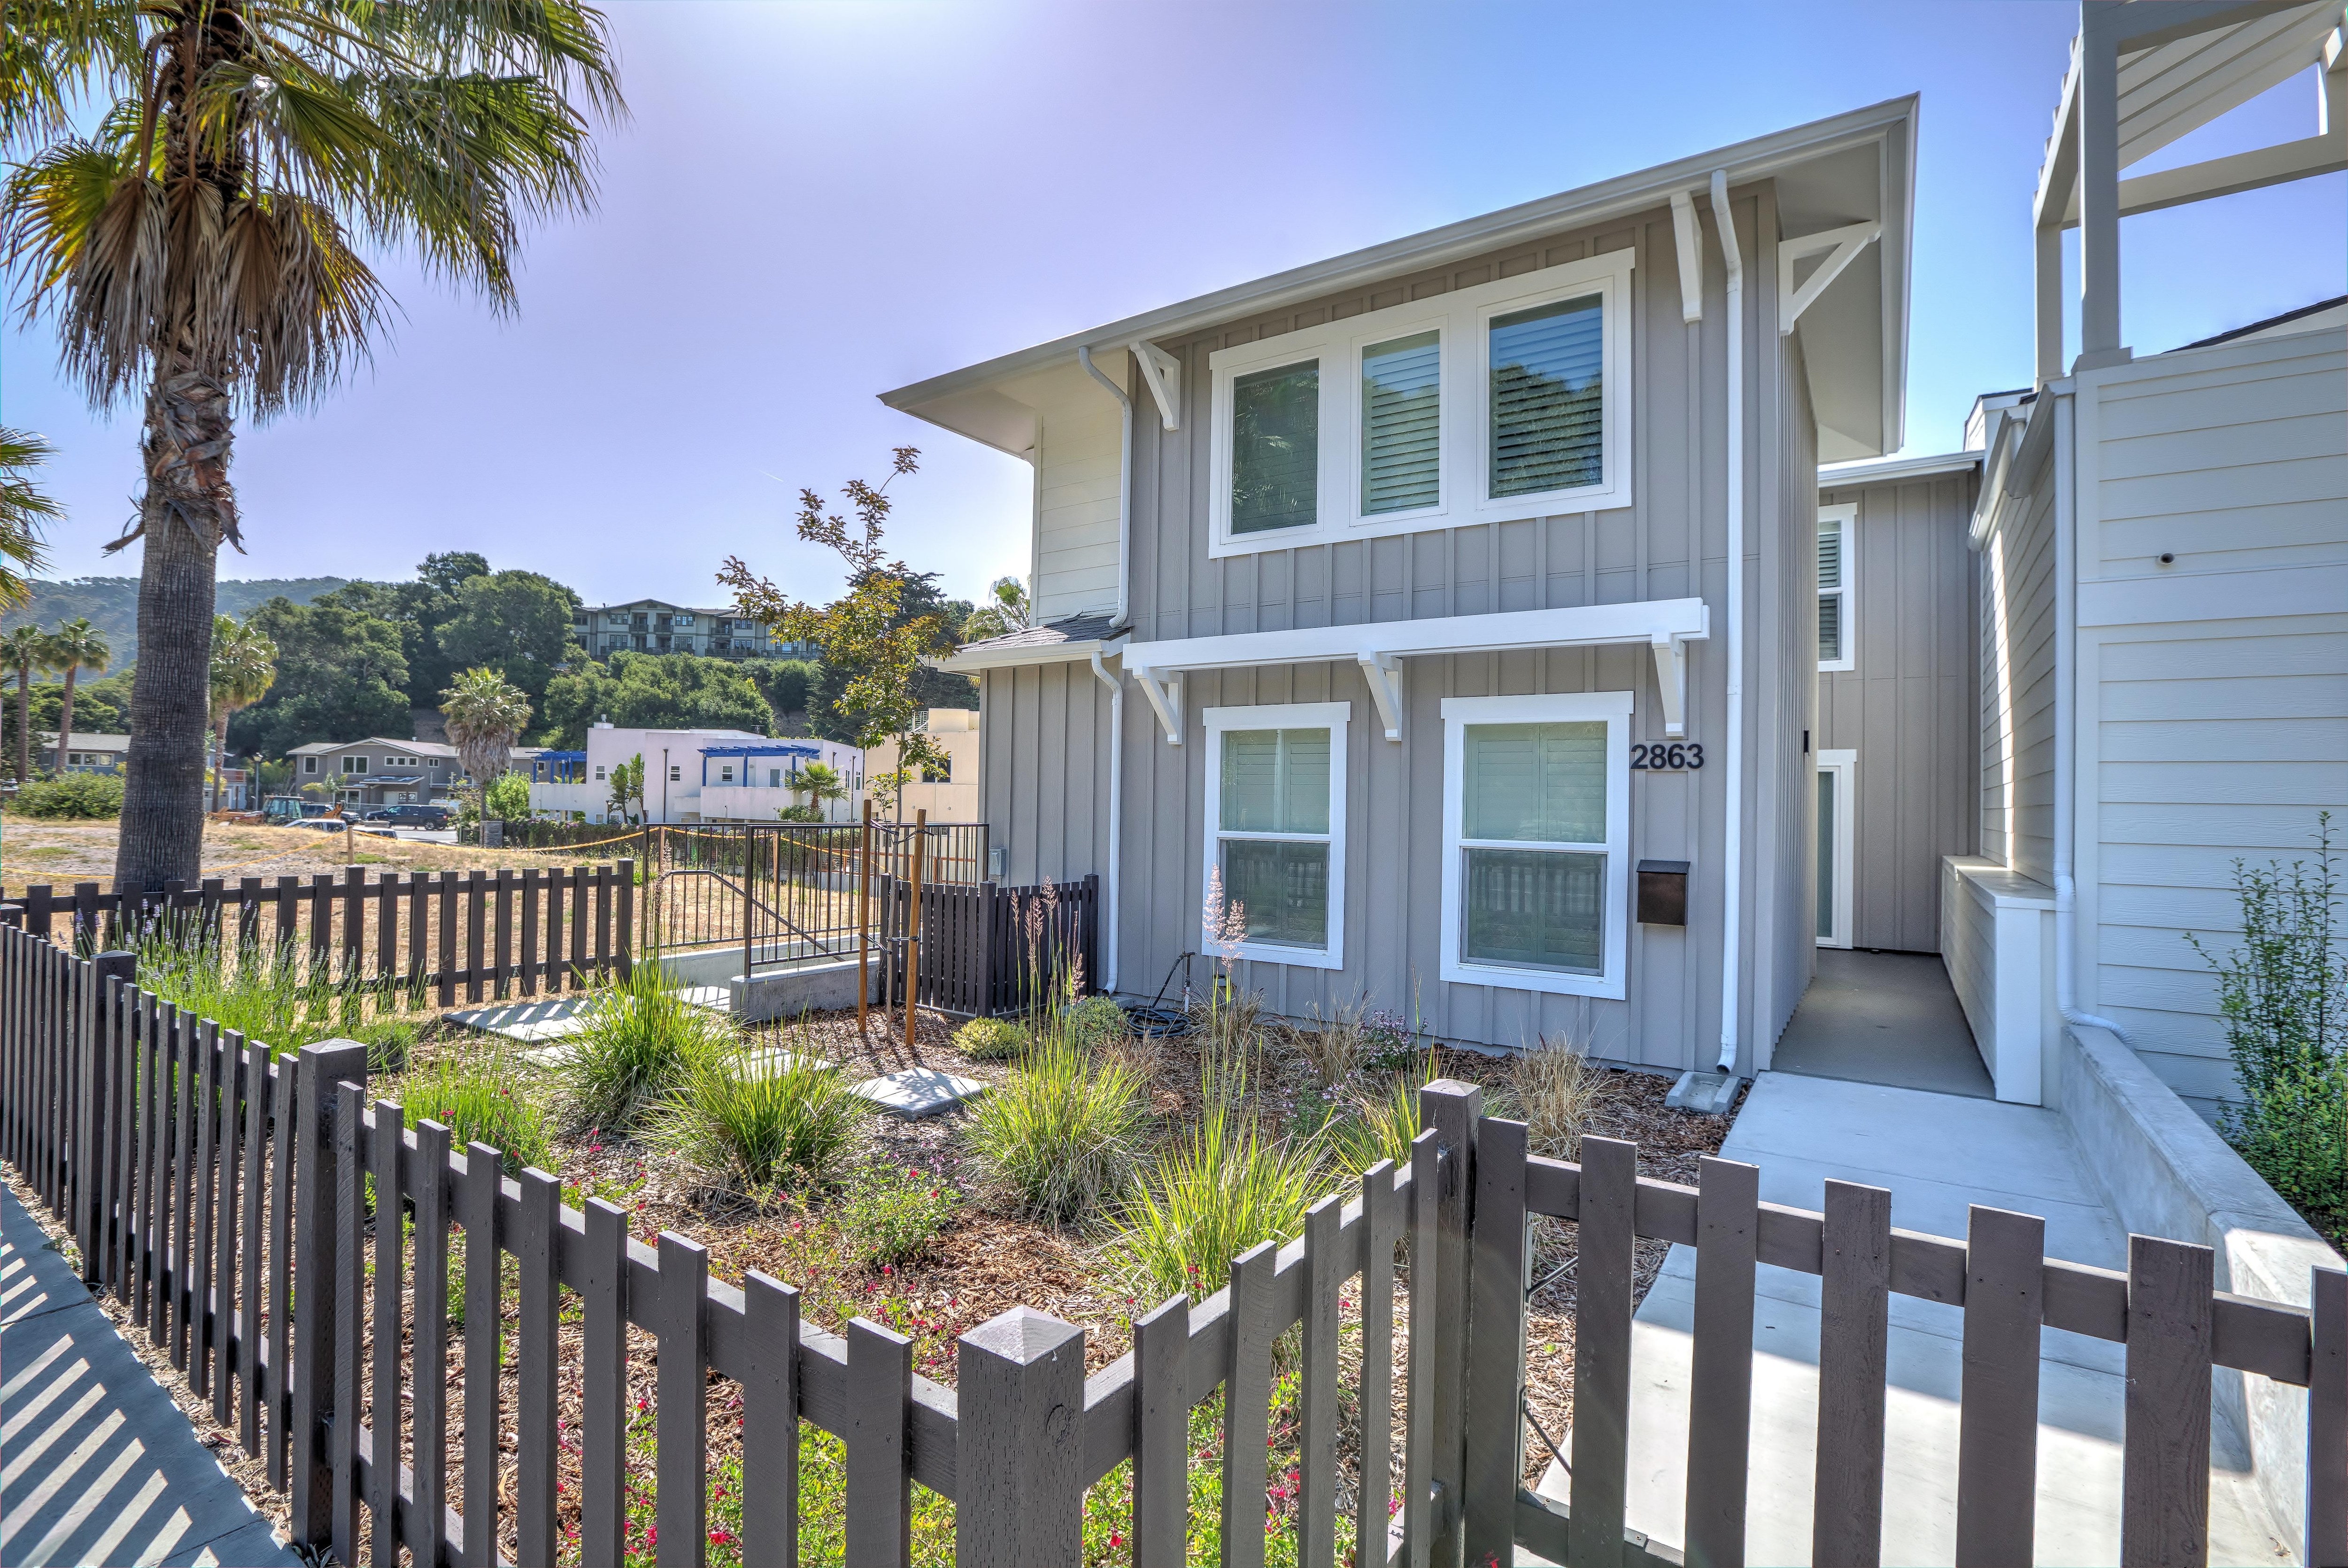 Welcome to Amore Avila. This is a single family home located on Avila Beach Drive. There is a nearby full-time resident. Due to close proximity we ask our guest to respect quiet hours 10pm to 8am.